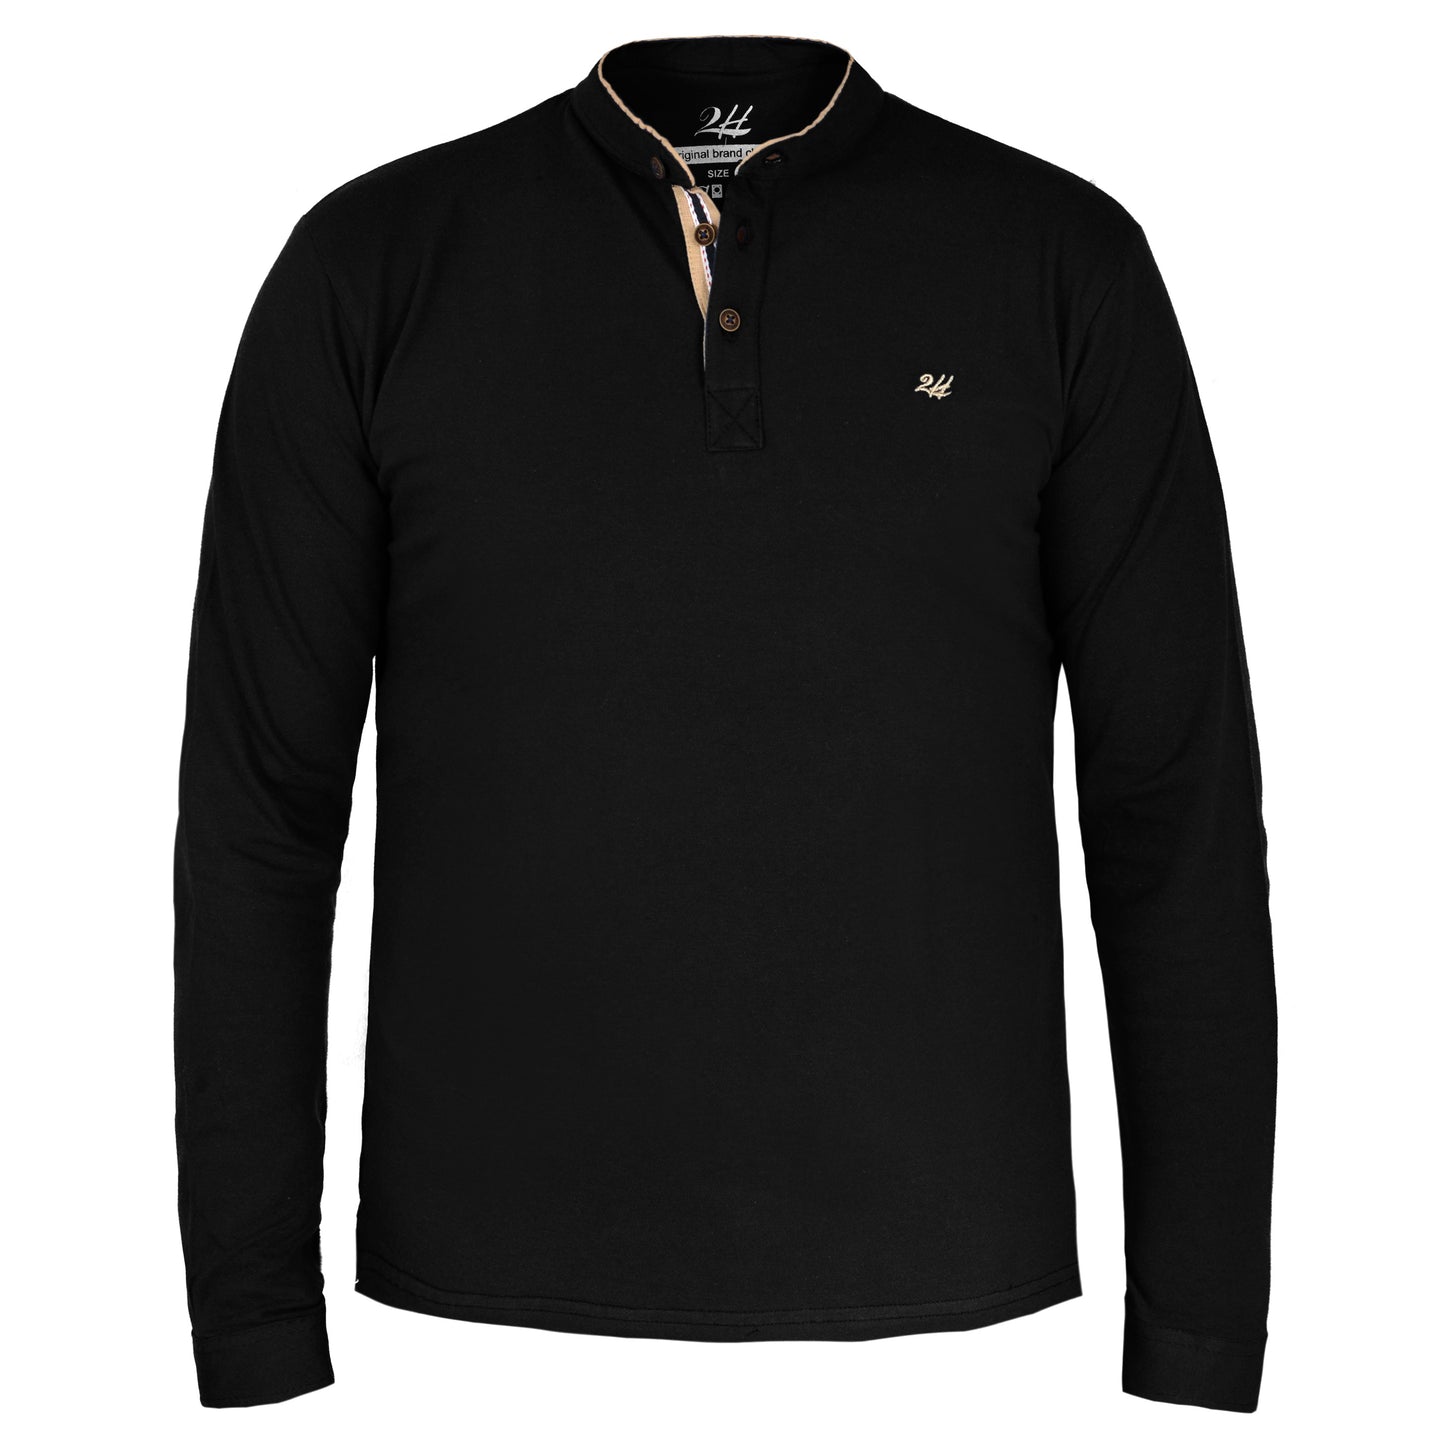 2H Black Stand Up Collar Sweater